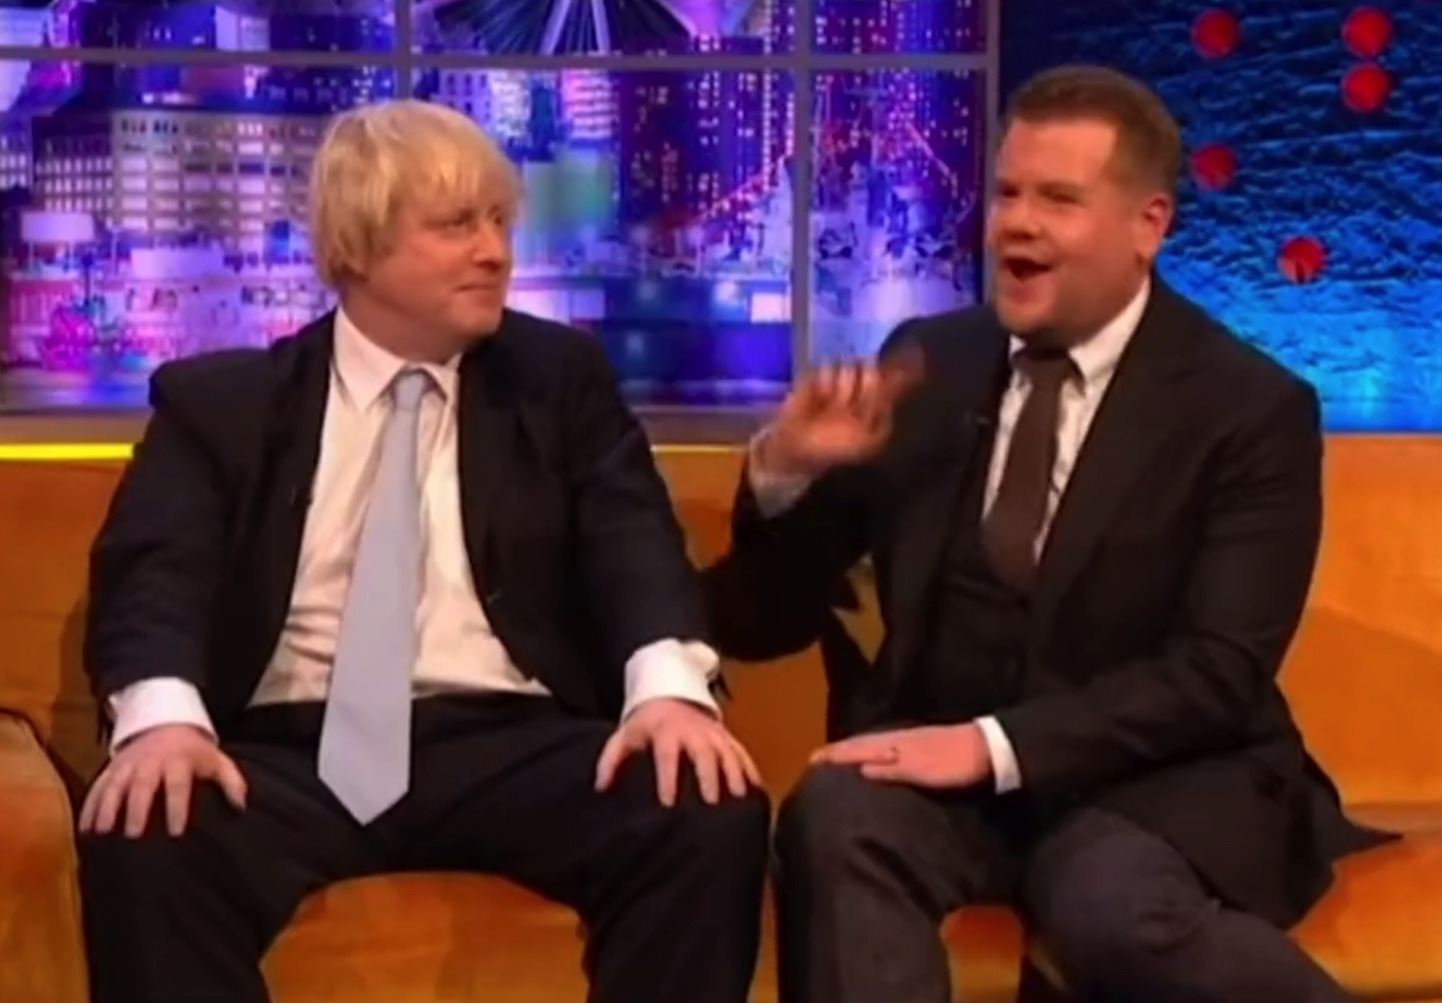 ‘Absolute b*llocks’: Flashback to when Johnson tried to convince Corden that wearing a helmet doesn’t make cycling safer